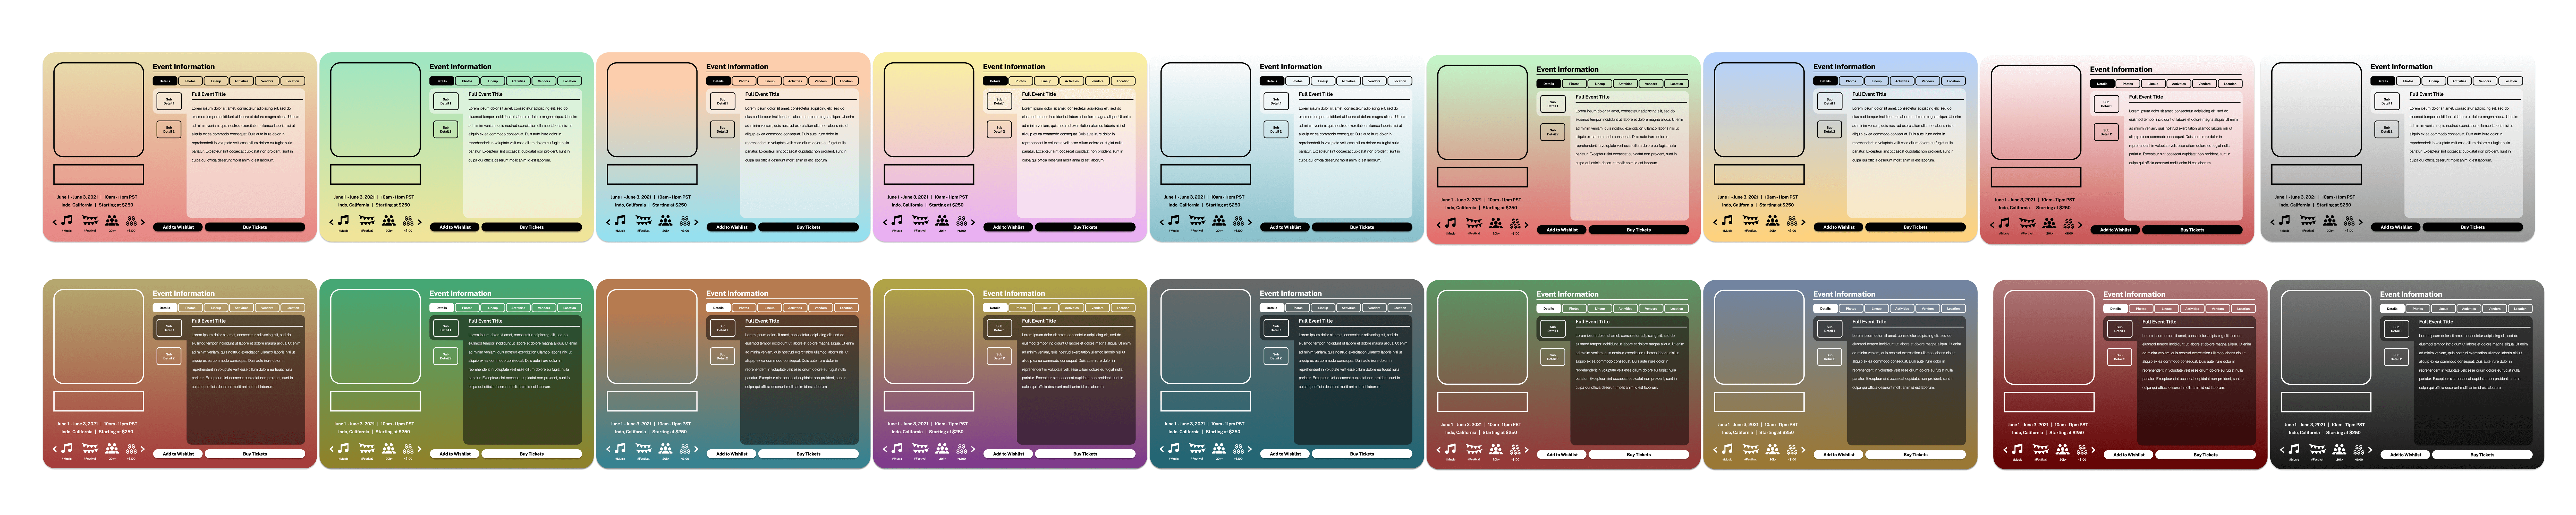 event-card-templates